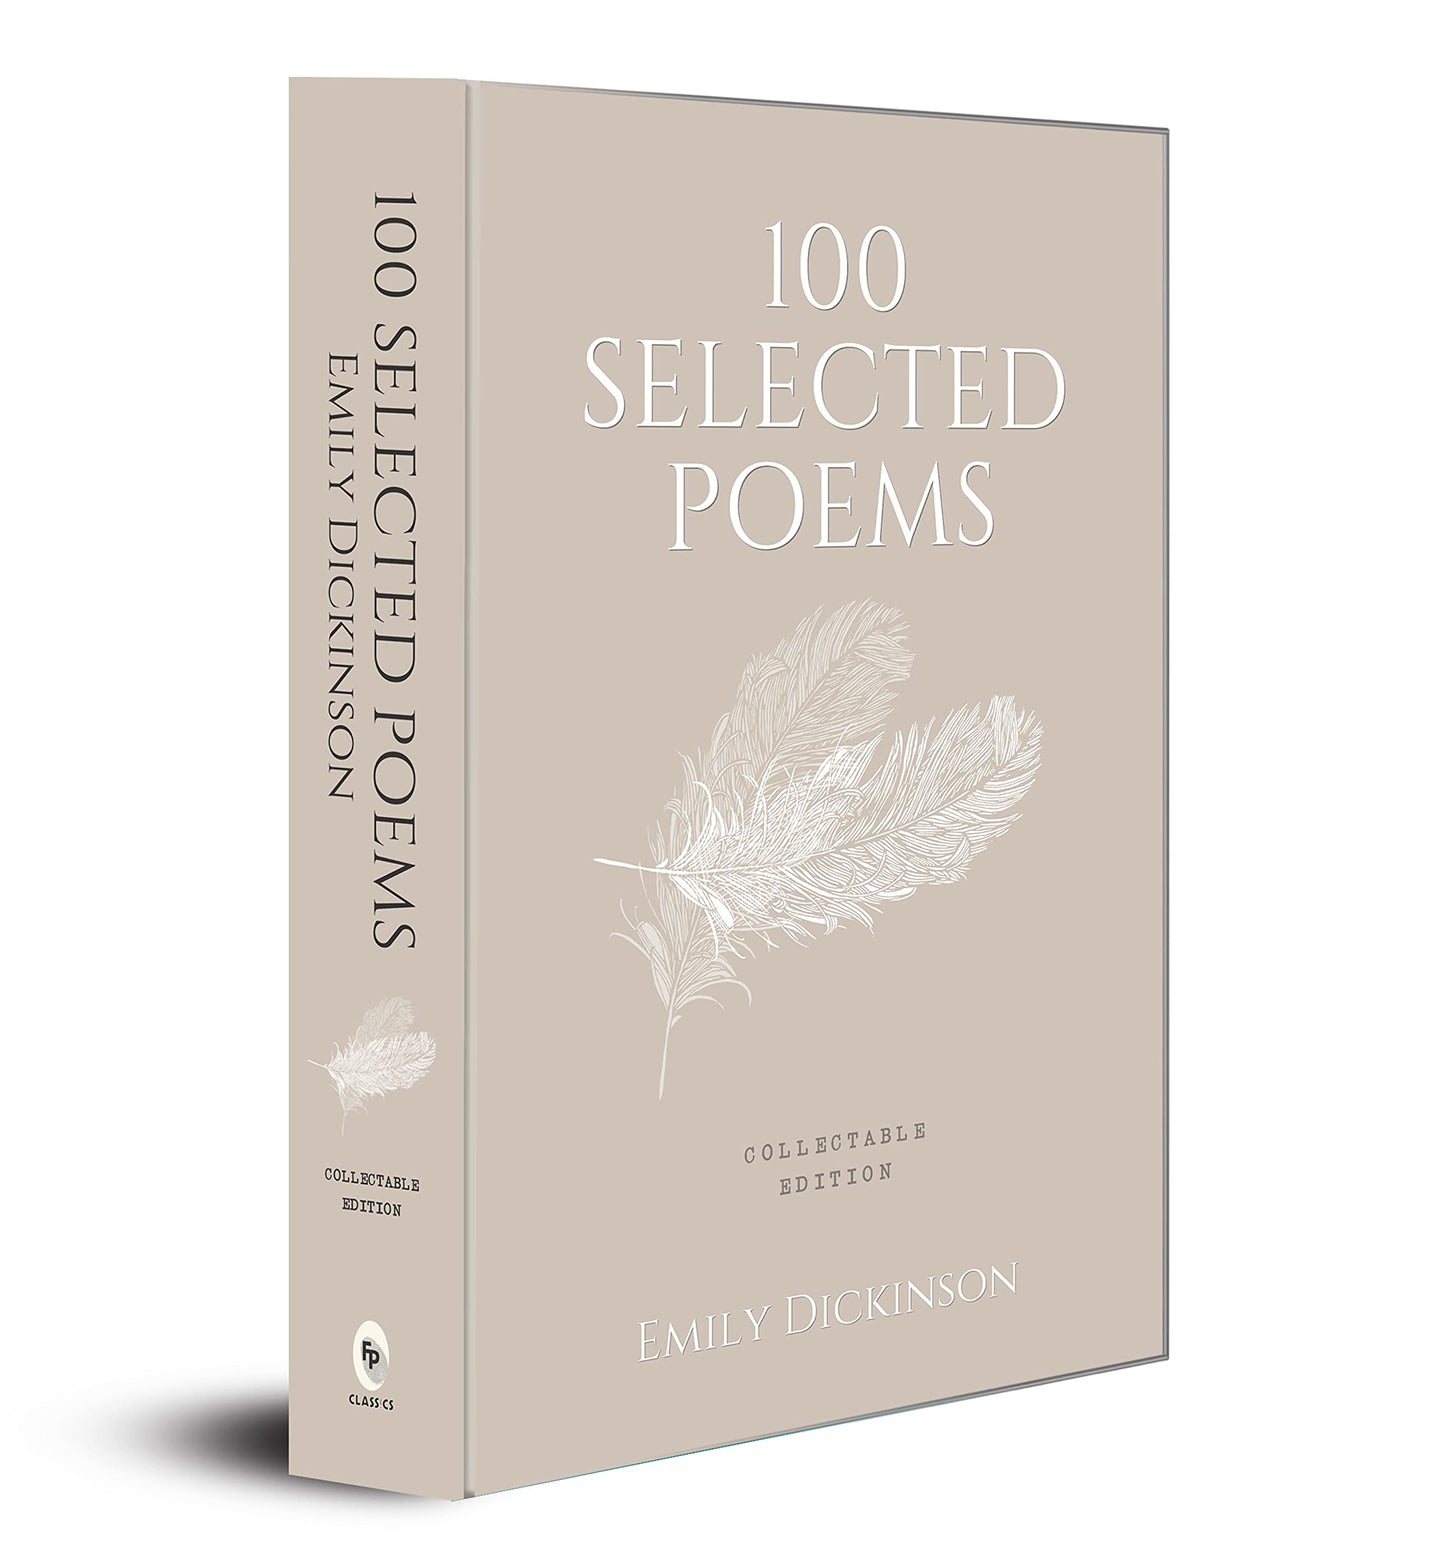 100 Selected Poems: Emily Dickinson